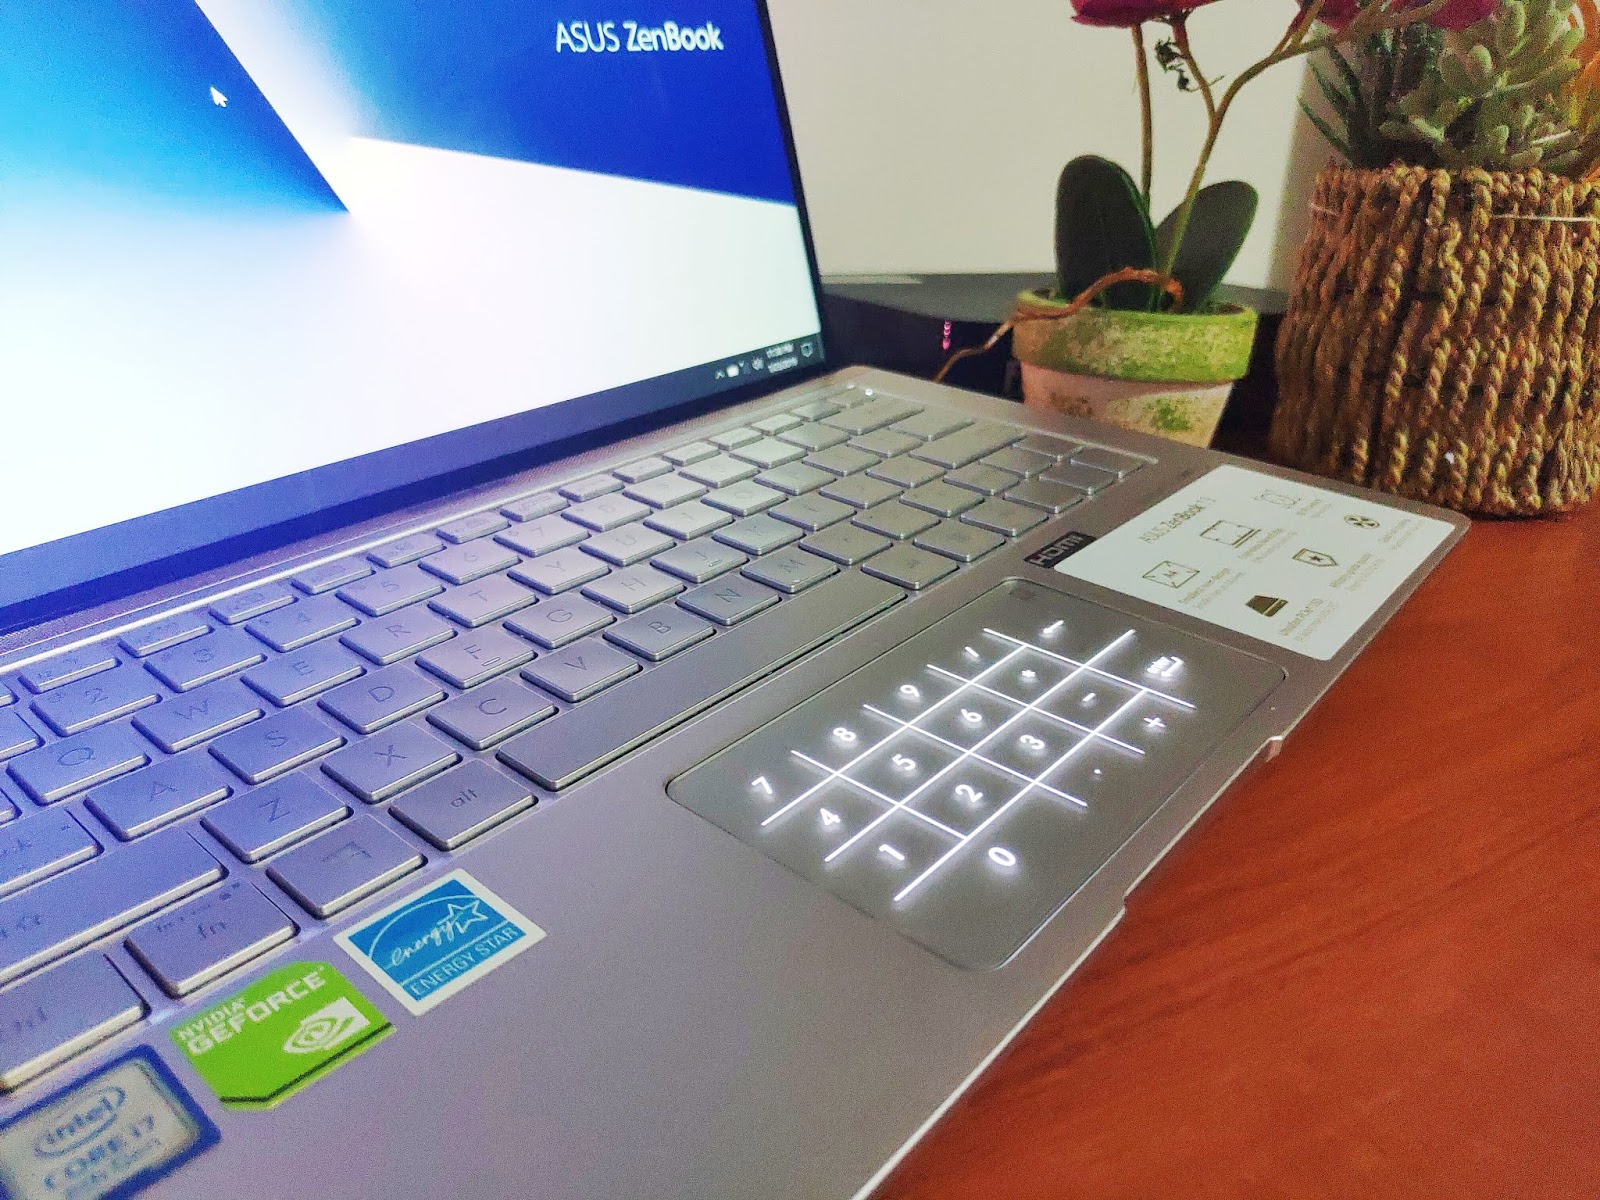 Ремонт asus zenbook. ZENBOOK ux333f. Асус number Pad. ASUS ux333. ASUS ZENBOOK 14 Keyboard and Touchpad Light.